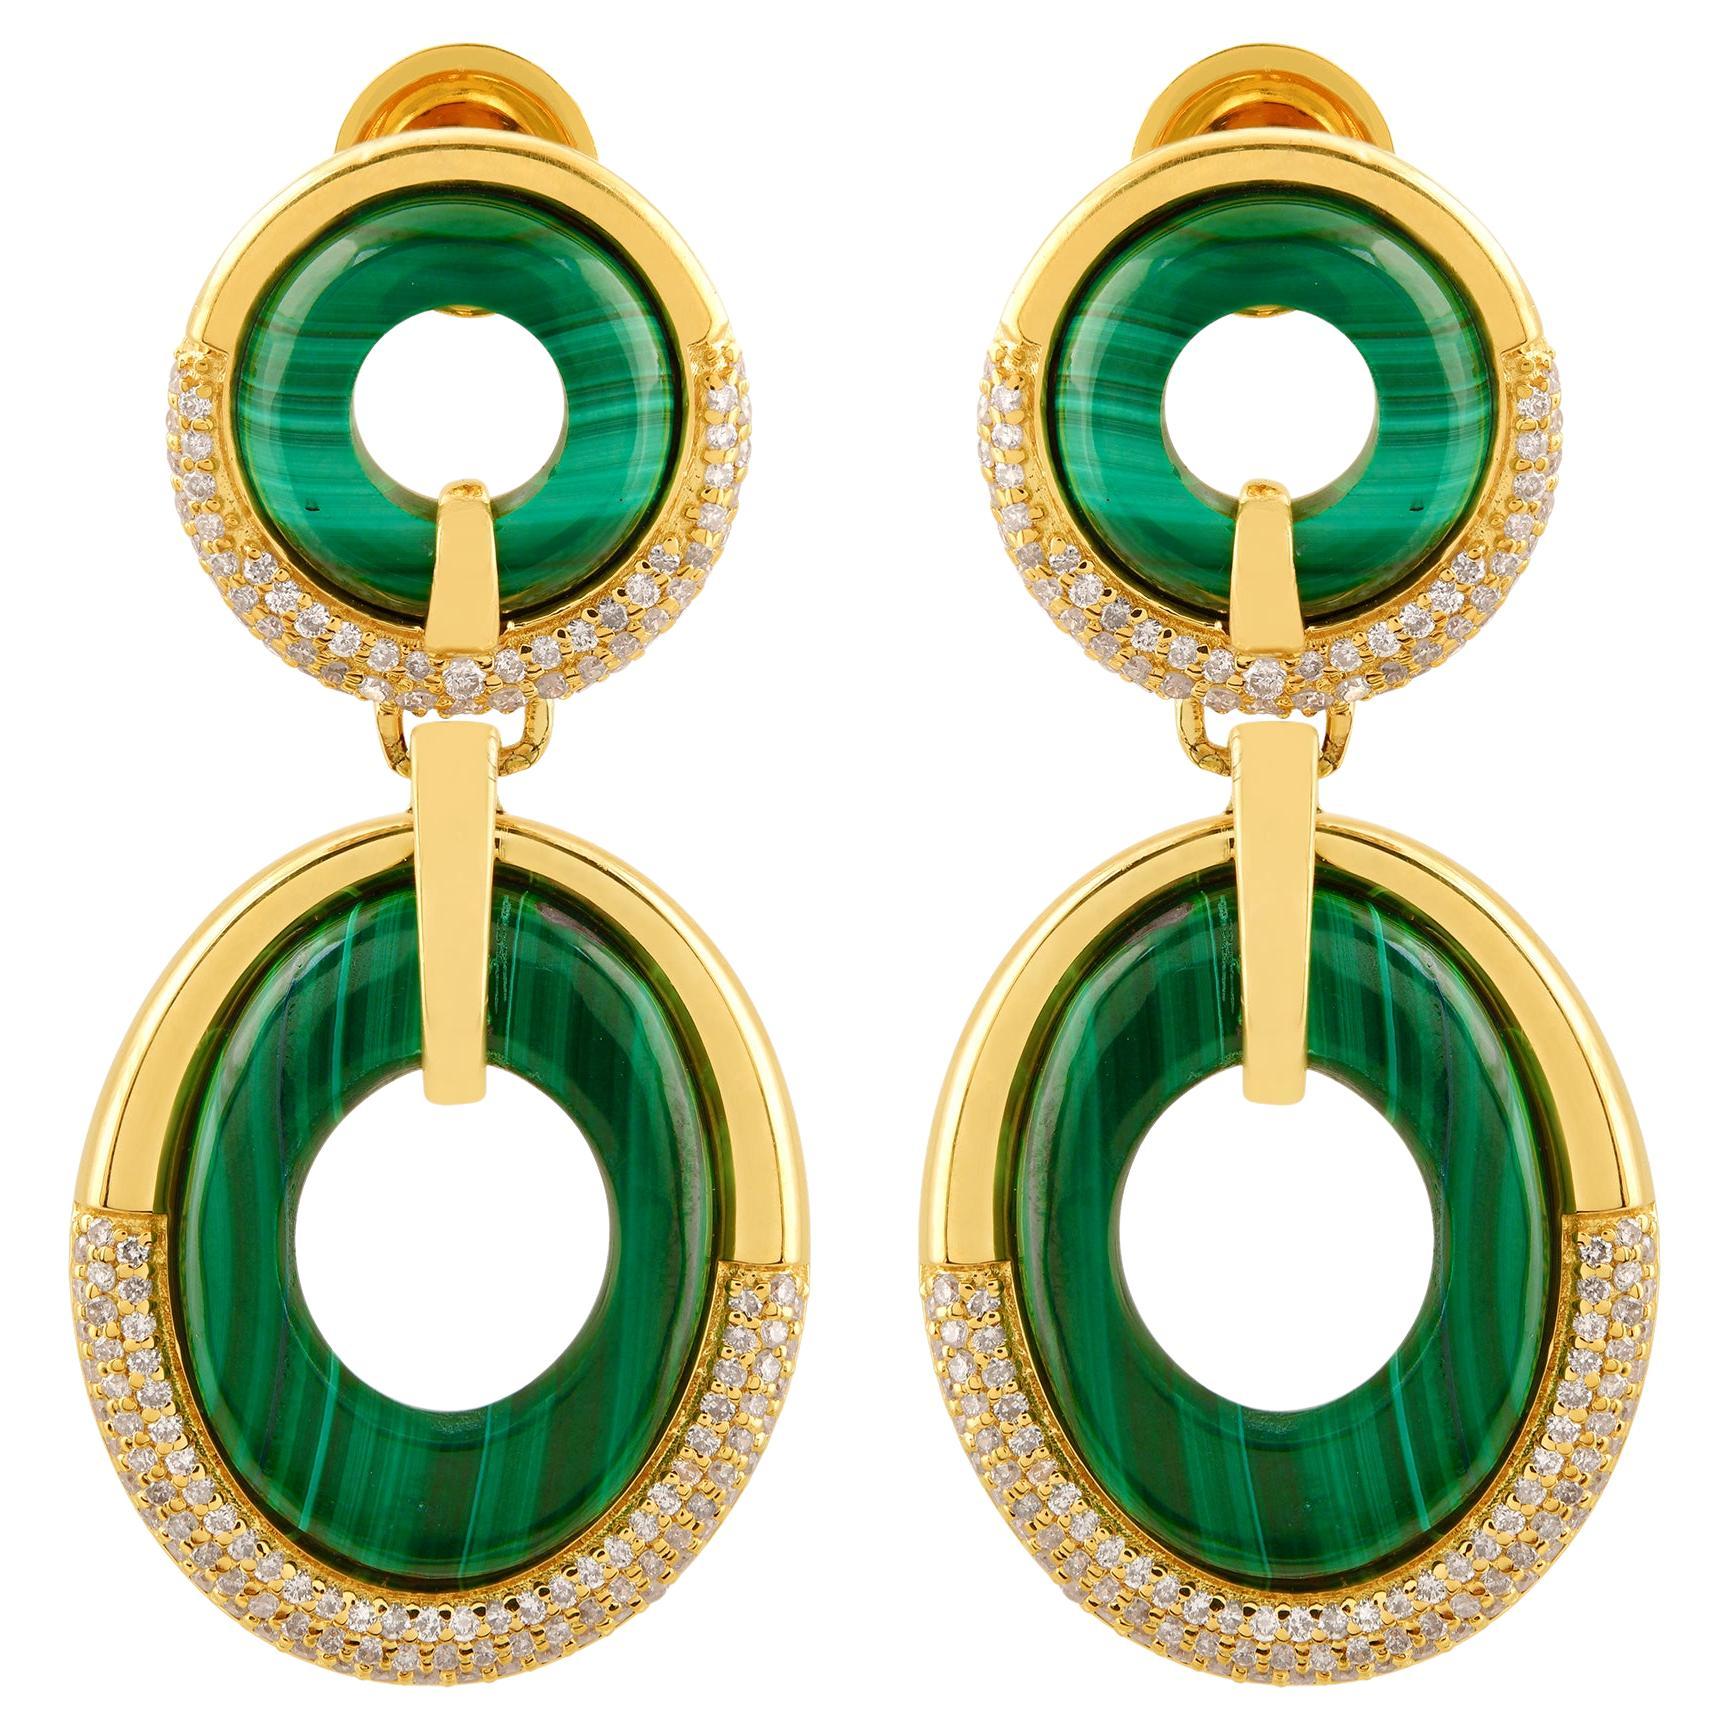 Make yourself trendy and stylish with this 18k Yellow Gold Earrings glittering with Malachite that will add majestic charm and elegance to your look. Exquisitely designed, this Earrings will provide you a classy look.

✧✧Welcome To Our Shop Spectrum